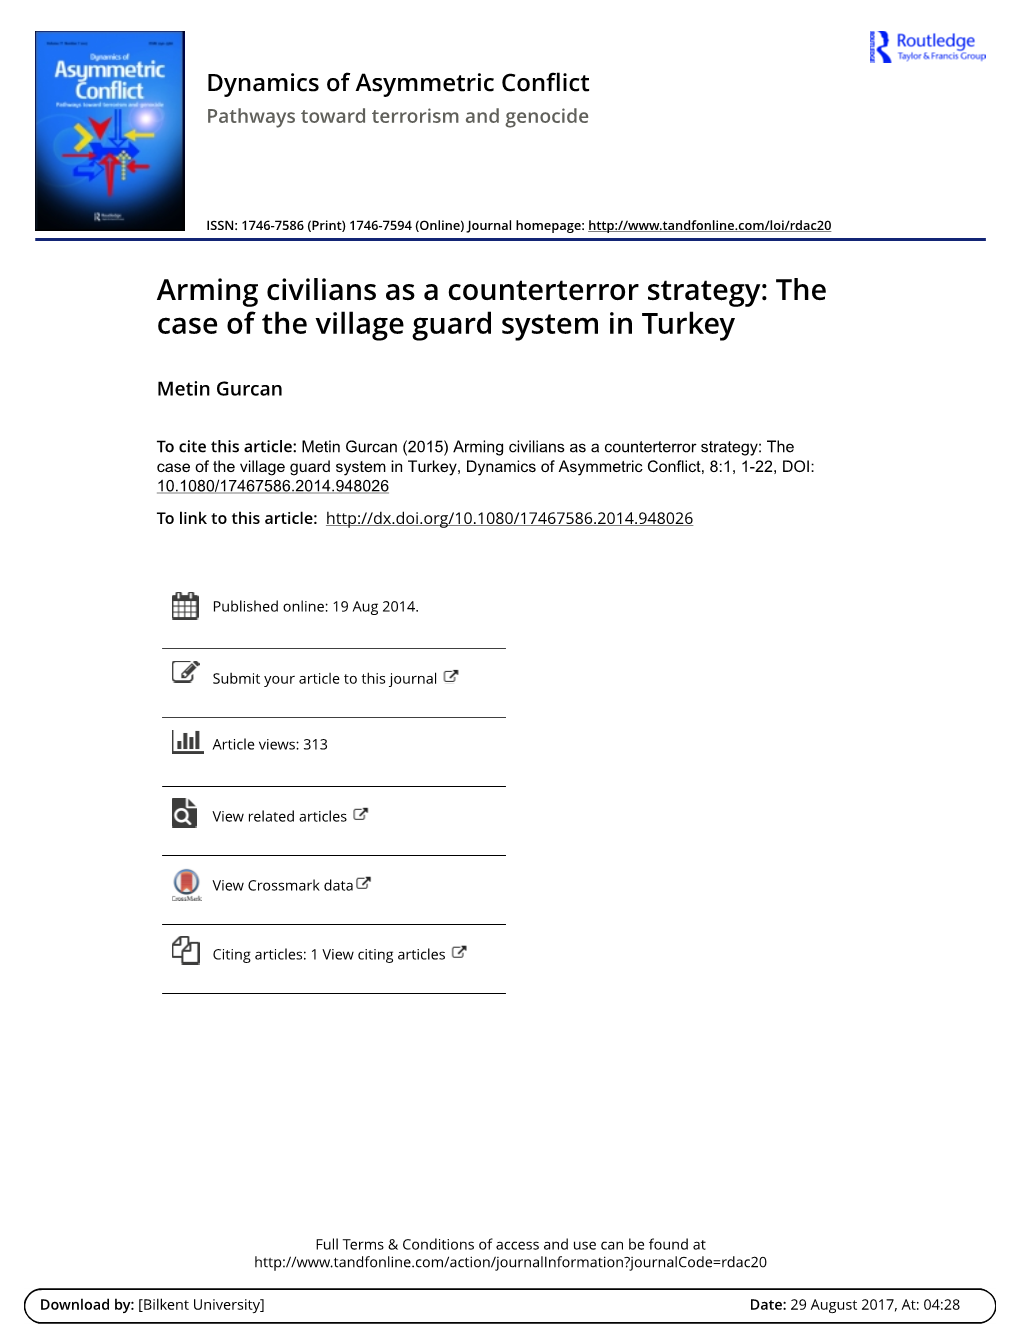 Arming Civilians As a Counterterror Strategy: the Case of the Village Guard System in Turkey